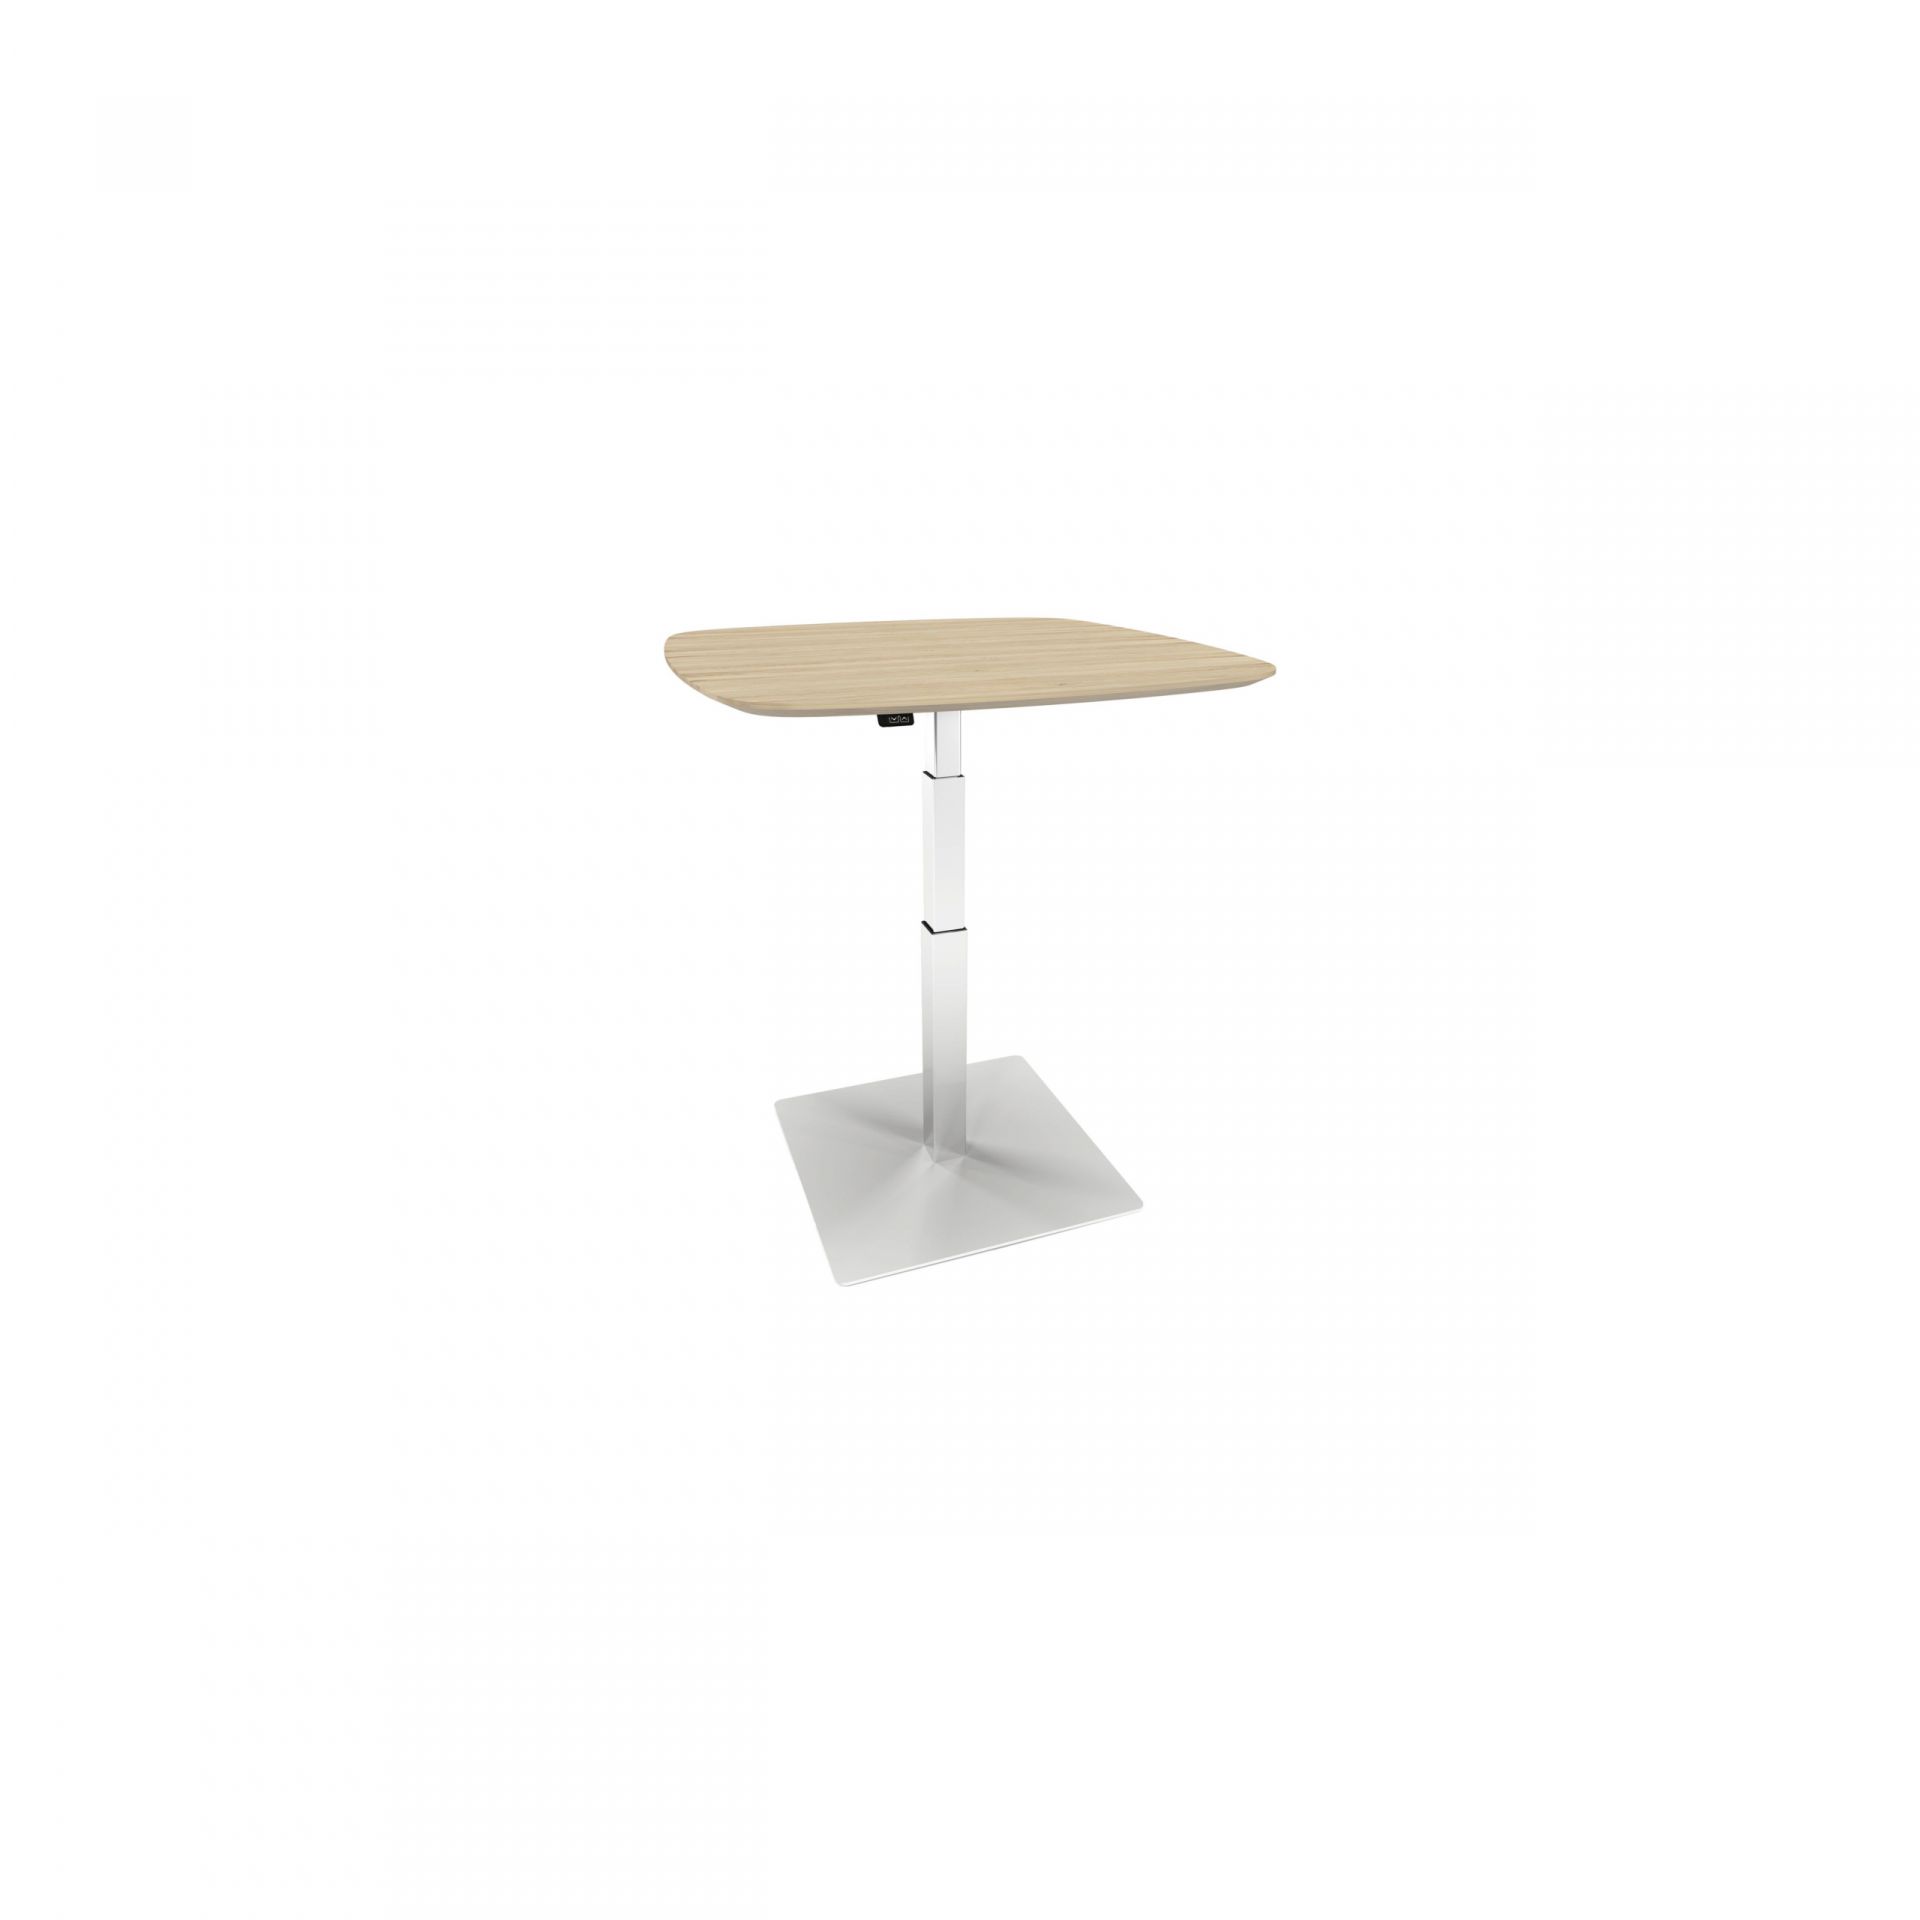 Solo Pillar table with square base product image 1